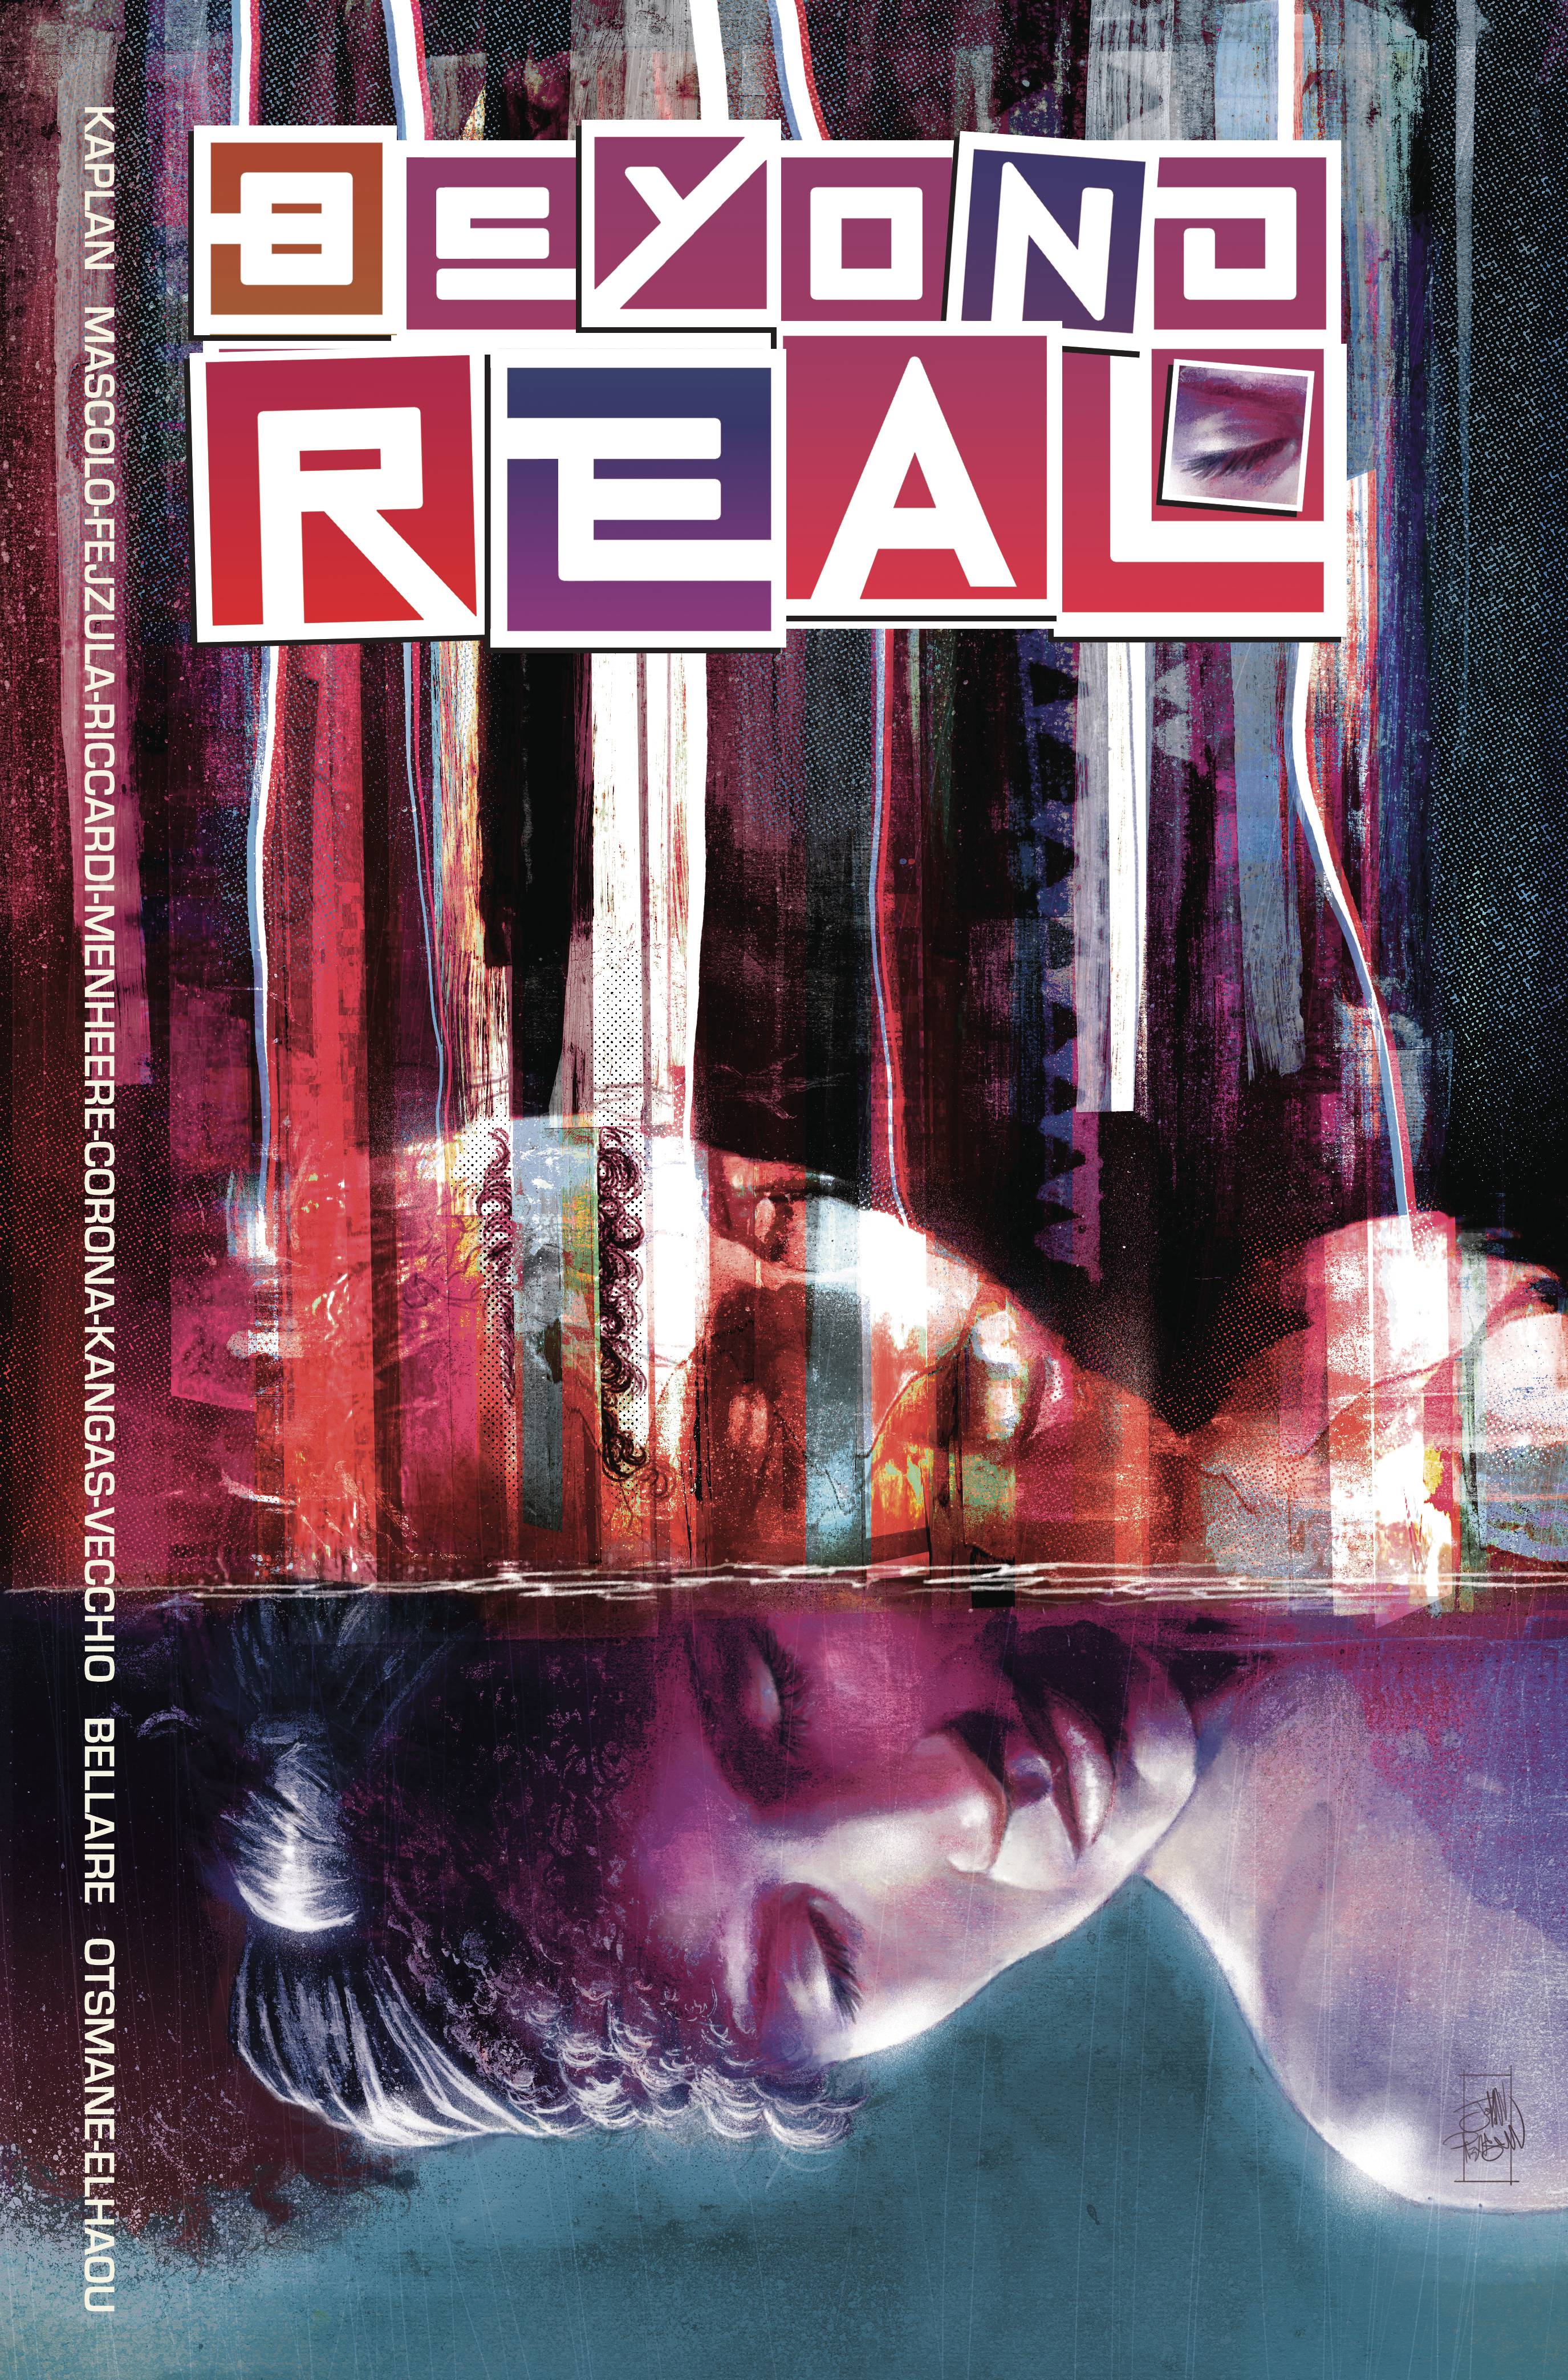 BEYOND REAL COMPLETE SERIES TP (C: 0-1-2)